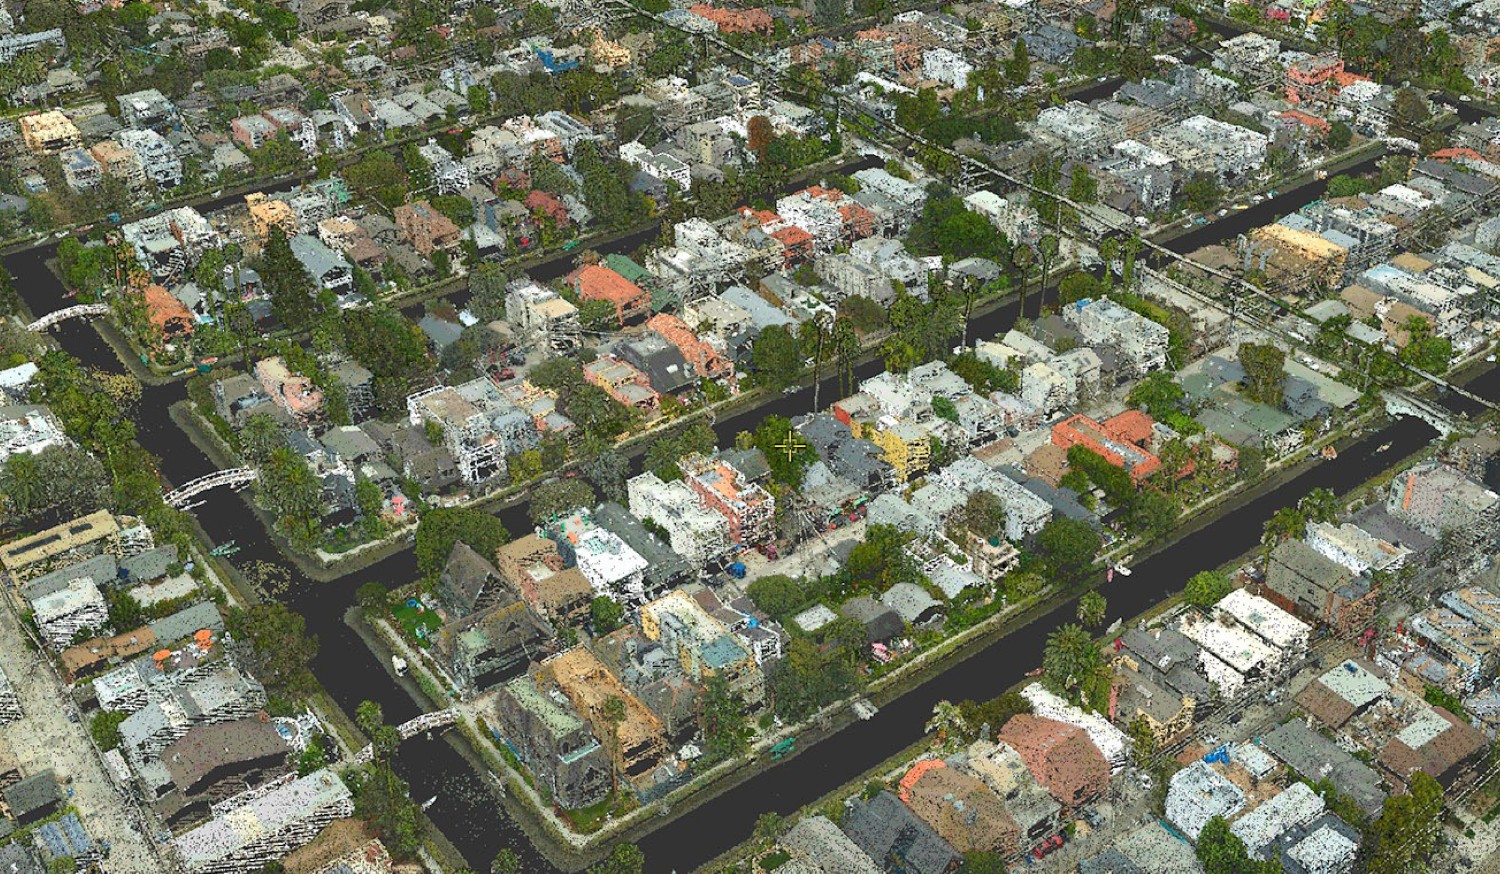 SimActive Software Used with both LiDAR and Imagery to Map Venice Beach, California during the Pandemic